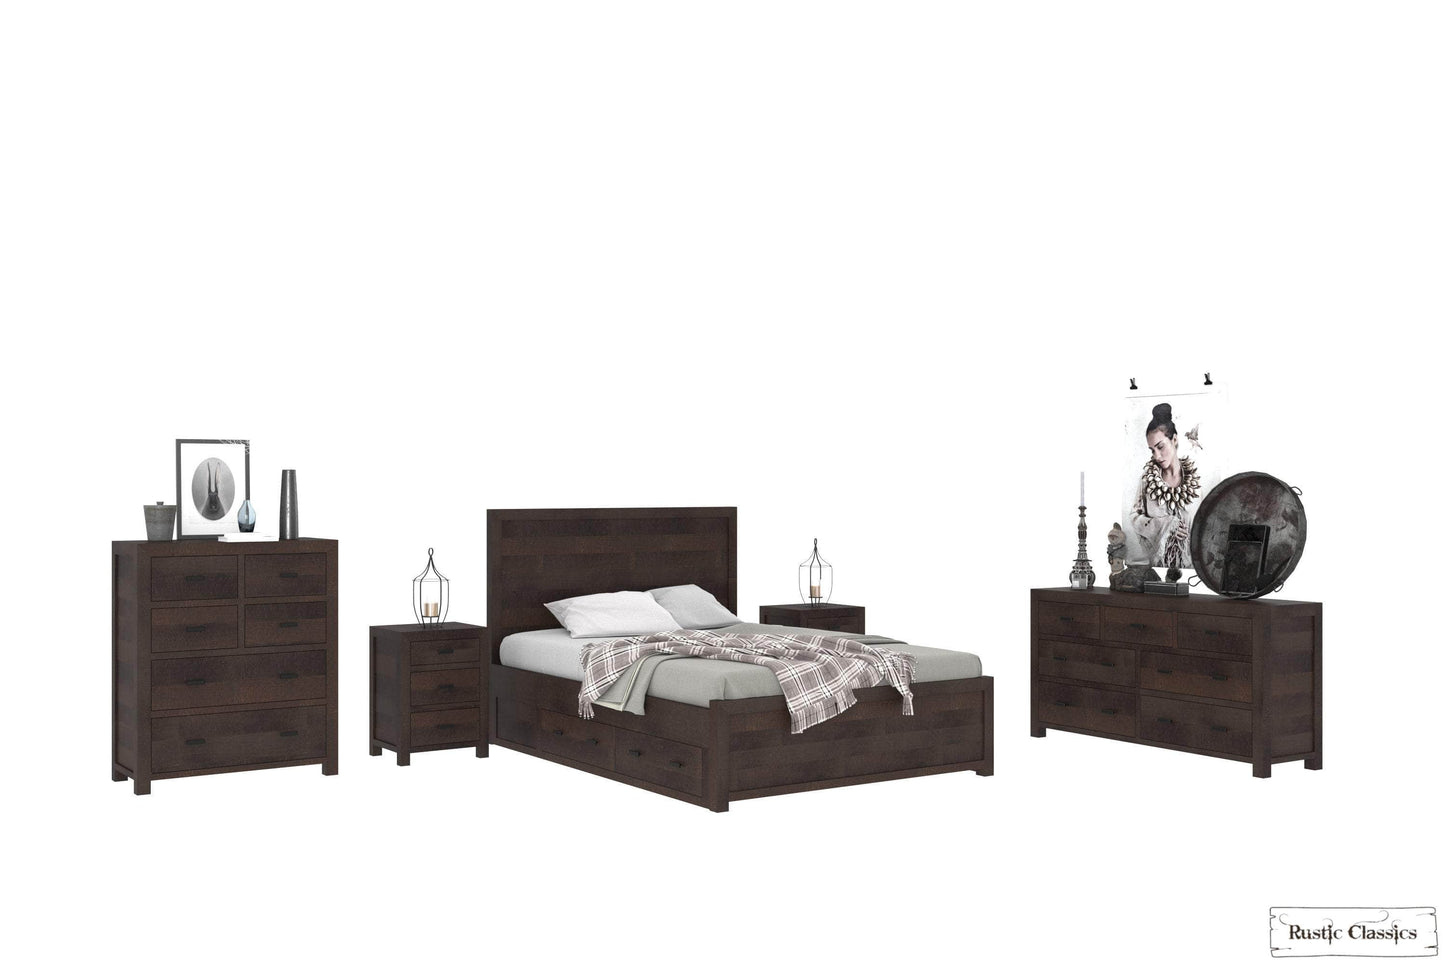 Pending - Rustic Classics Bedroom Set Whistler 5 Piece Reclaimed Wood Storage Platform Bedroom Furniture Set in Brown – Available in 2 Sizes